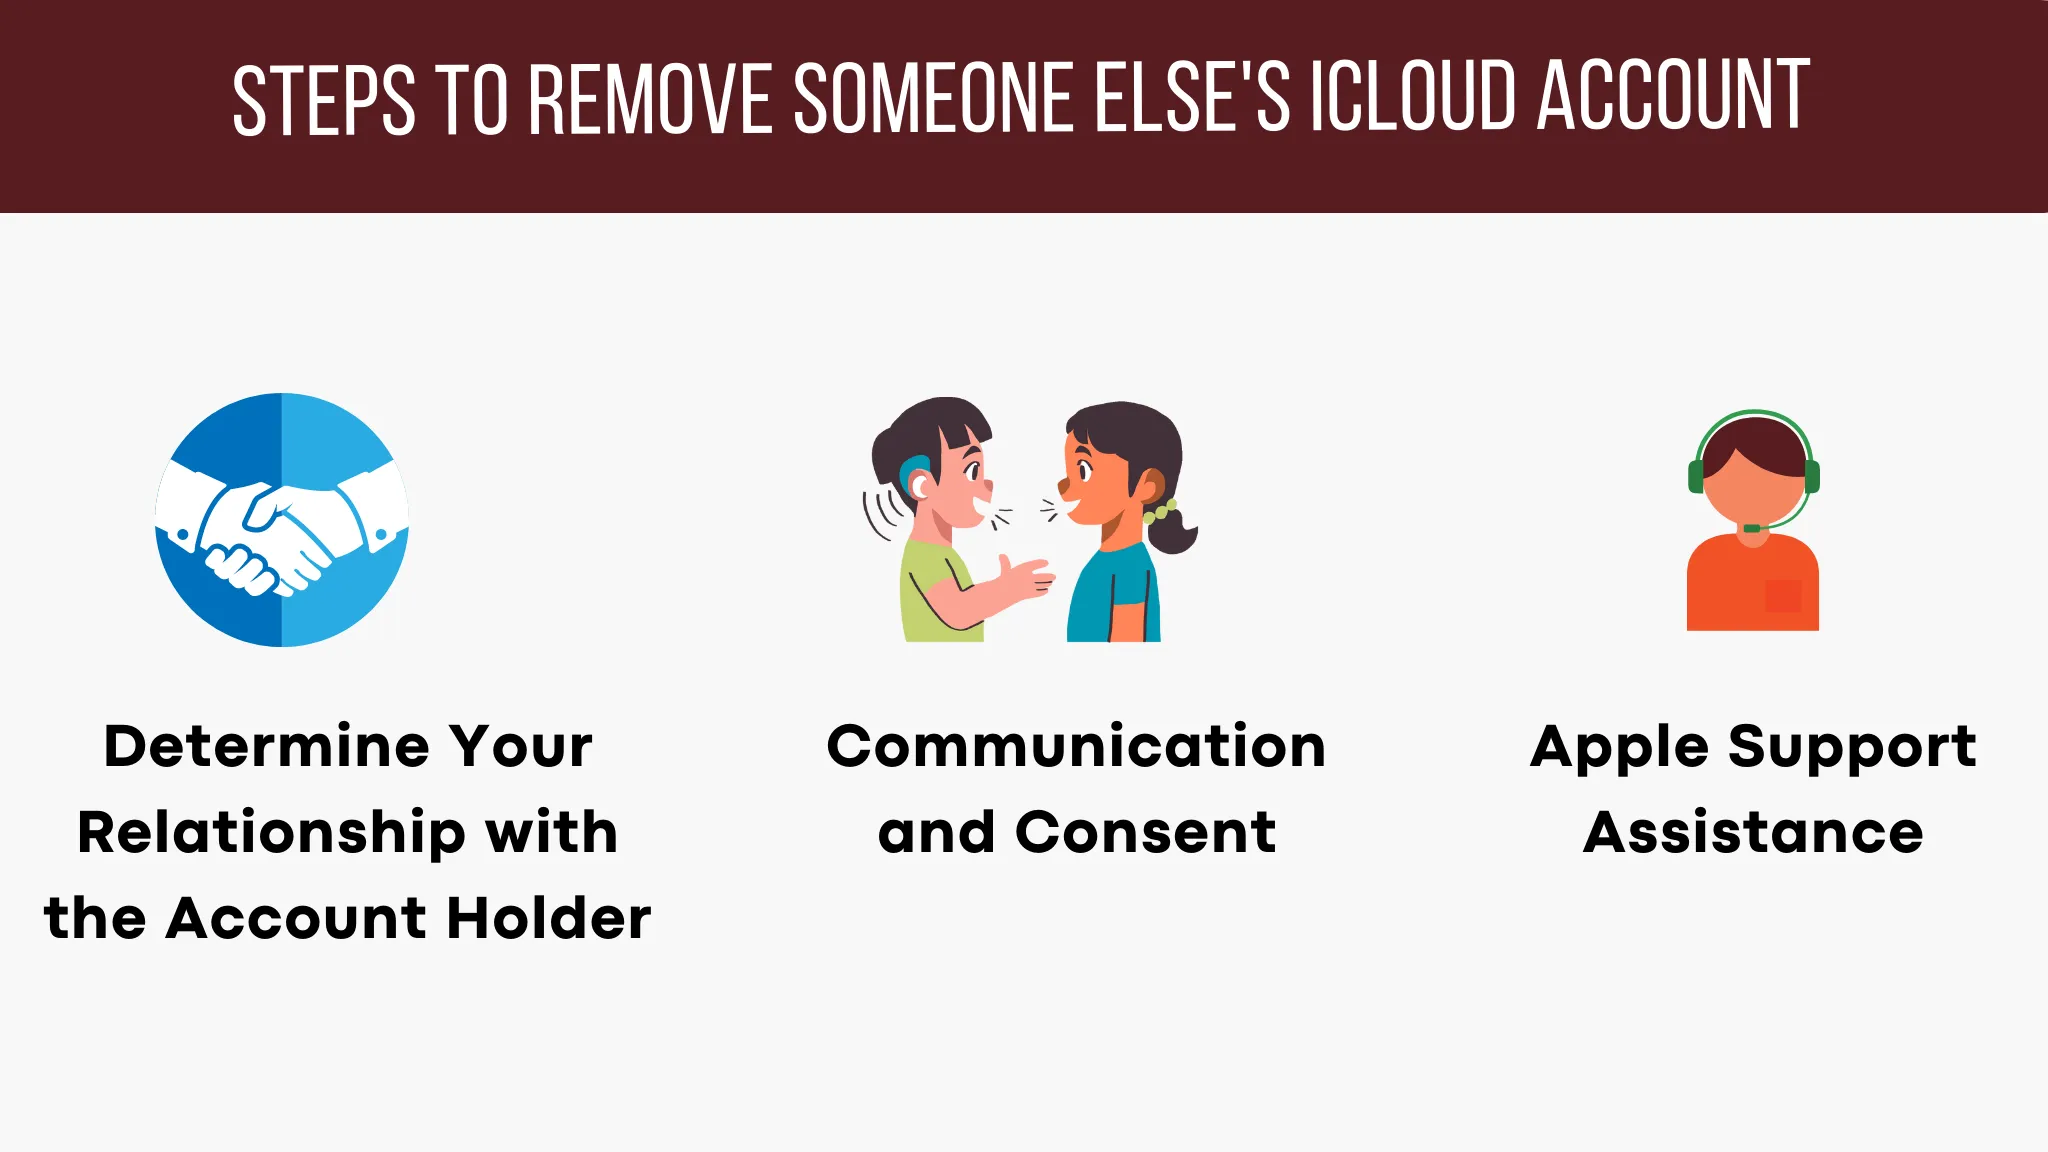 Steps to Remove Someone Else's iCloud Account